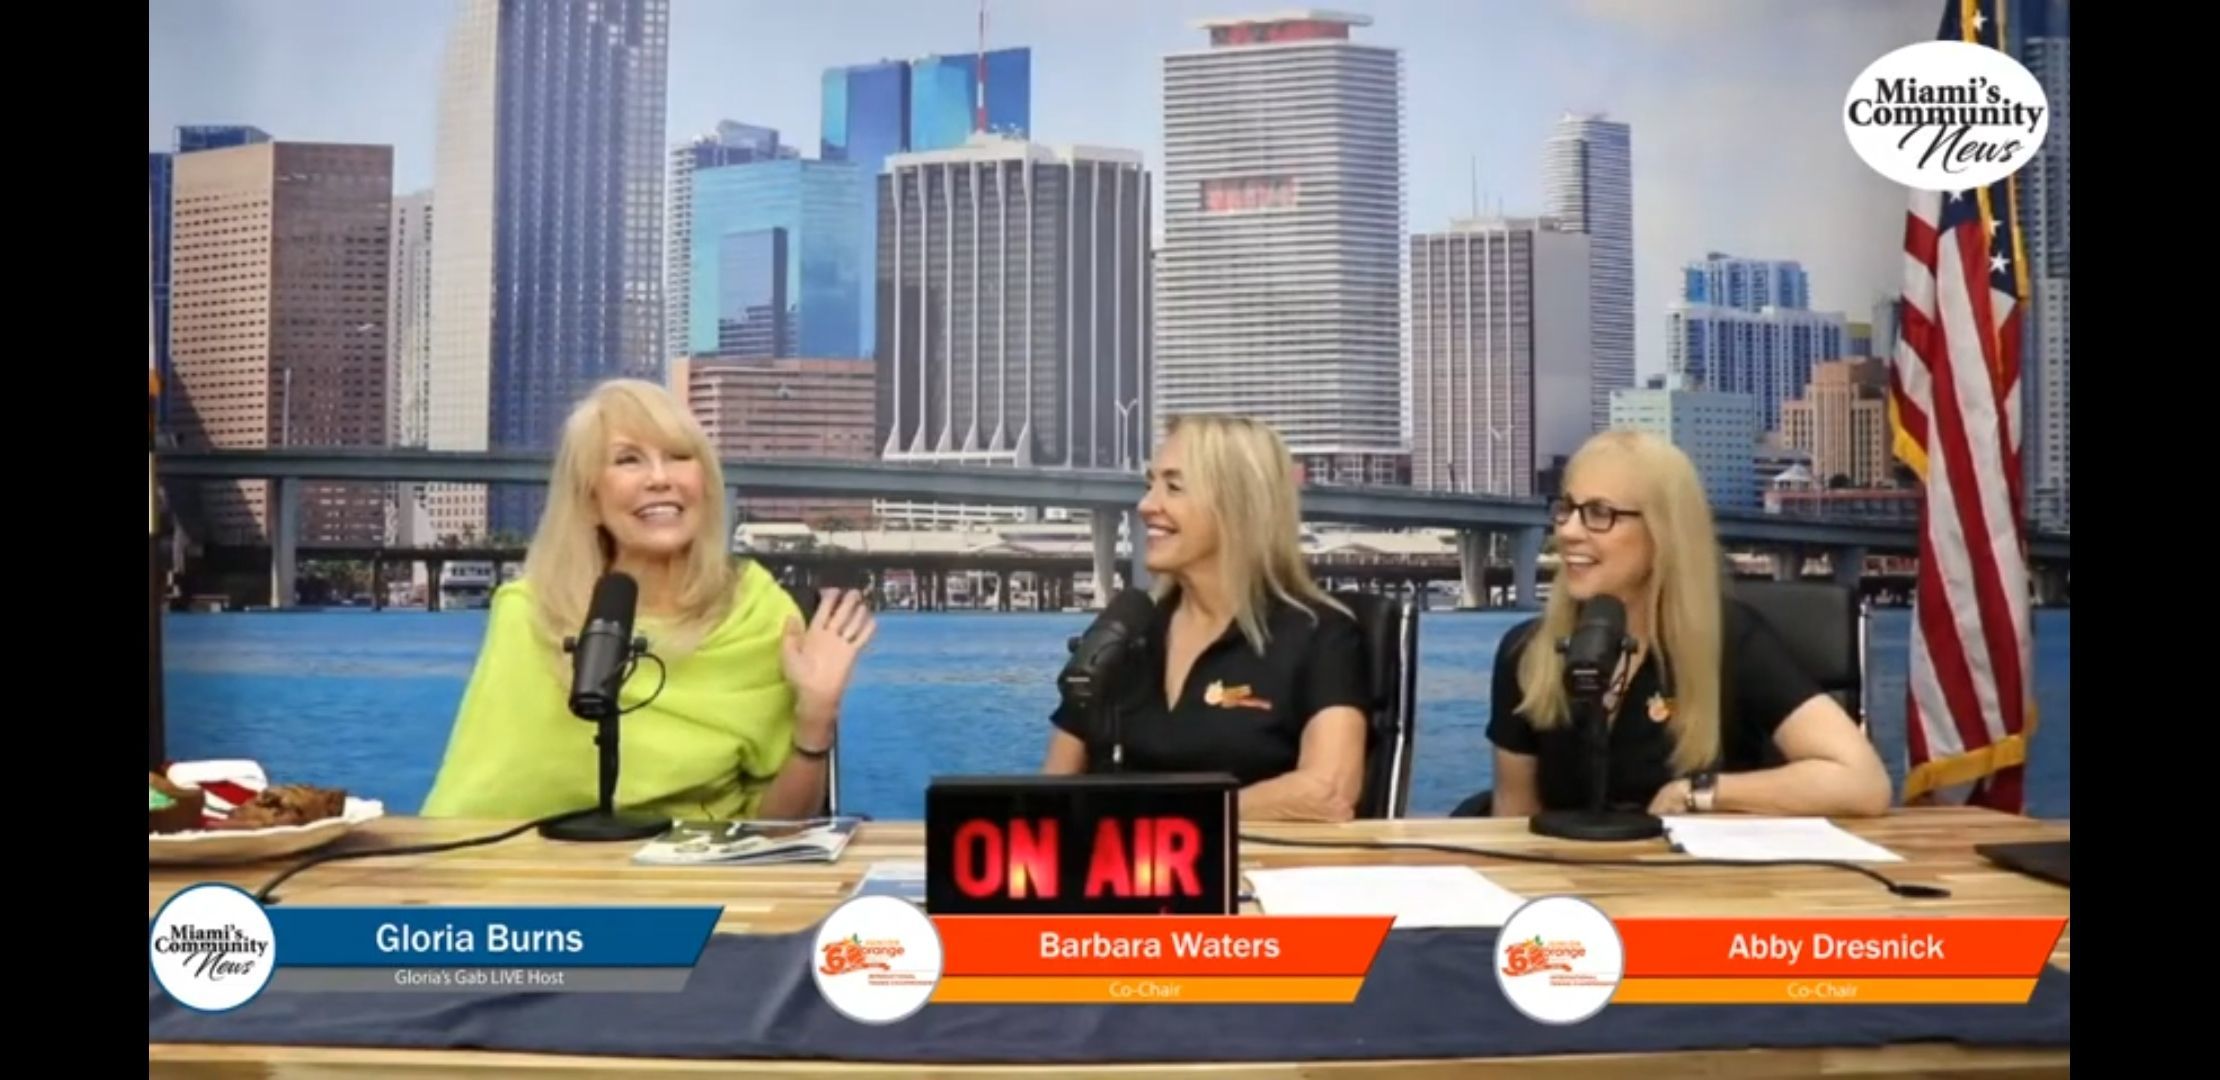 Tennis Chairpersons Barbara Waters and Abby Dresnick on Gloria's Gab